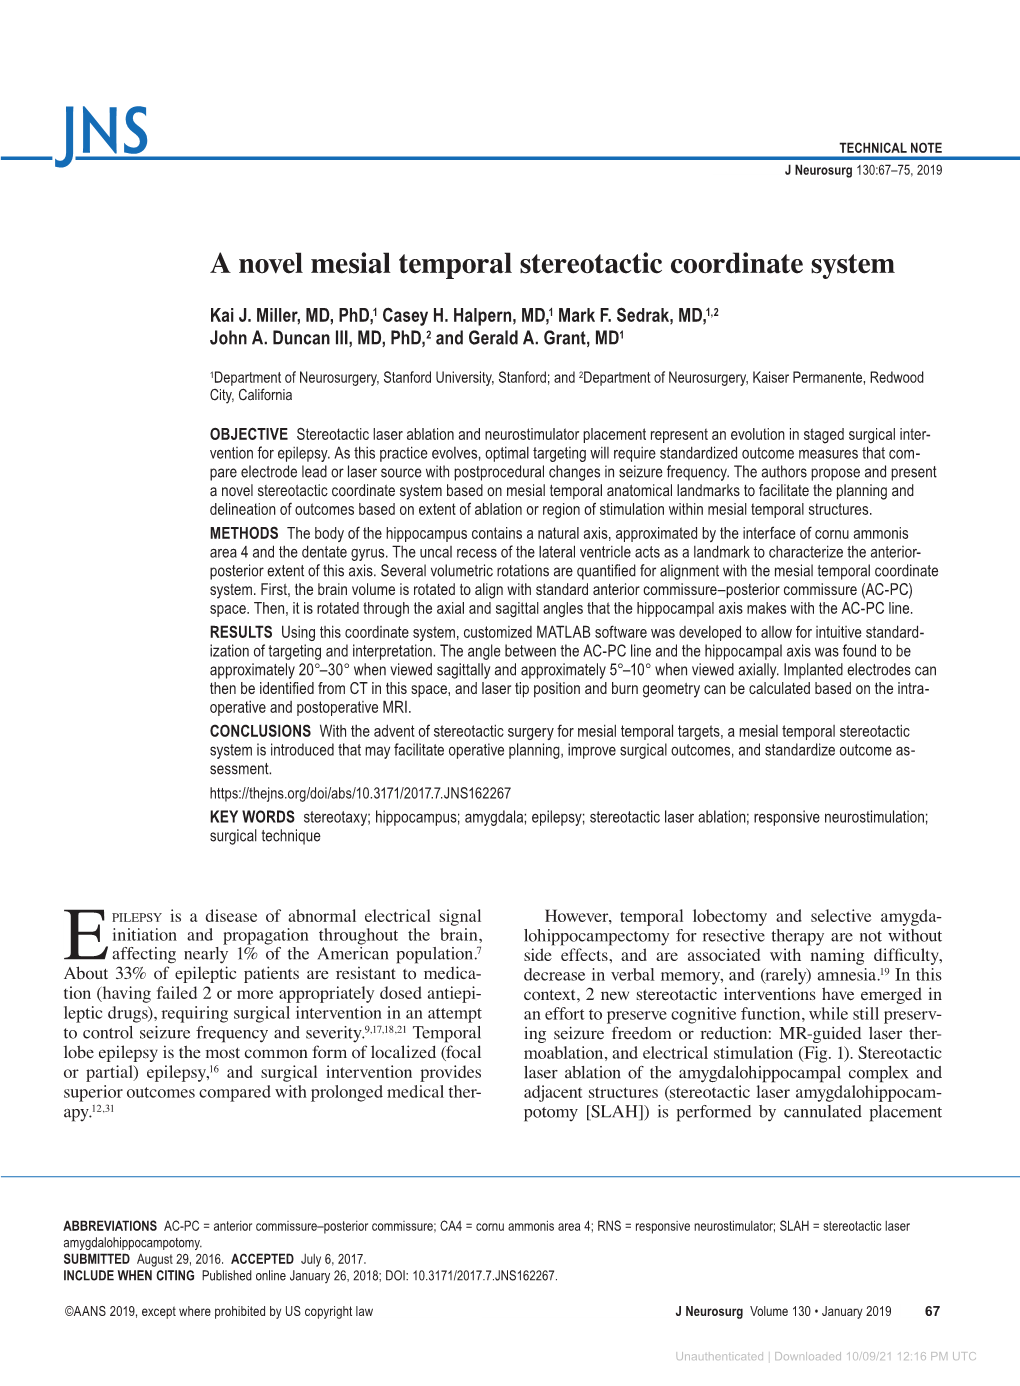 A Novel Mesial Temporal Stereotactic Coordinate System